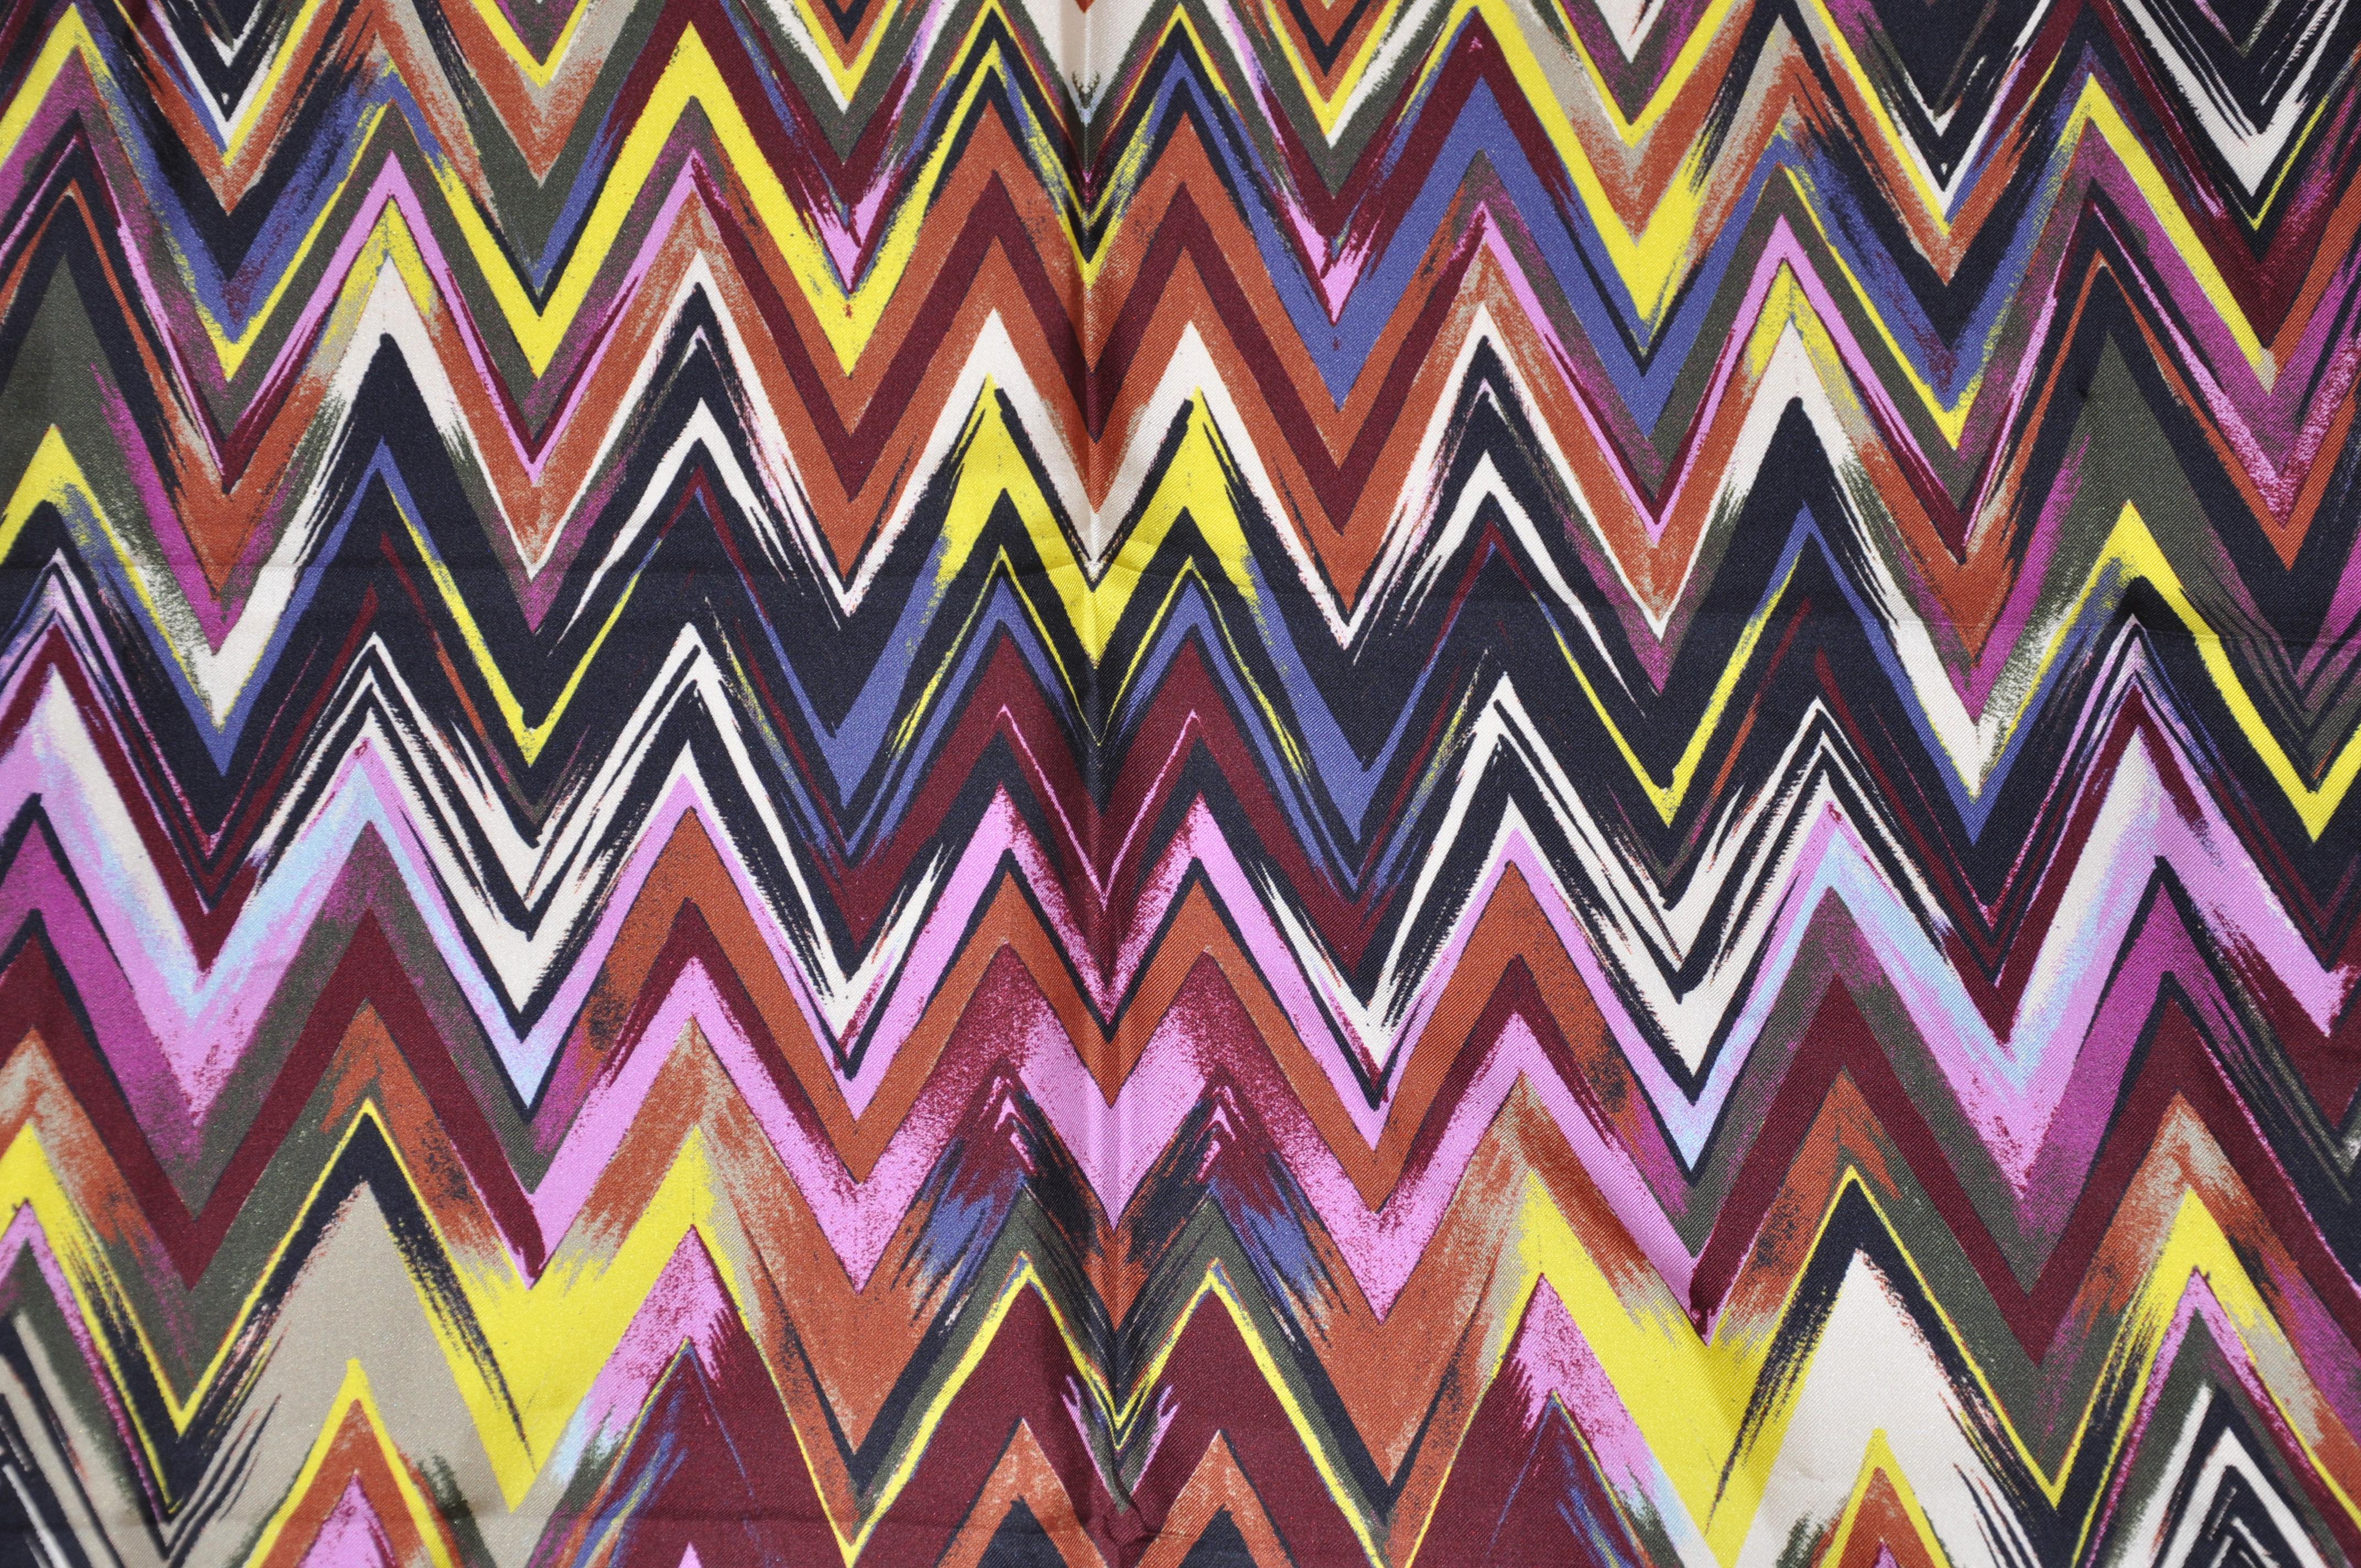        Missoni wonderfully detailed iconic signature Multicolor ZigZag silk scarf finished with hand-rolled edges, measures 35 inches by 36 inches. Made in Italy.